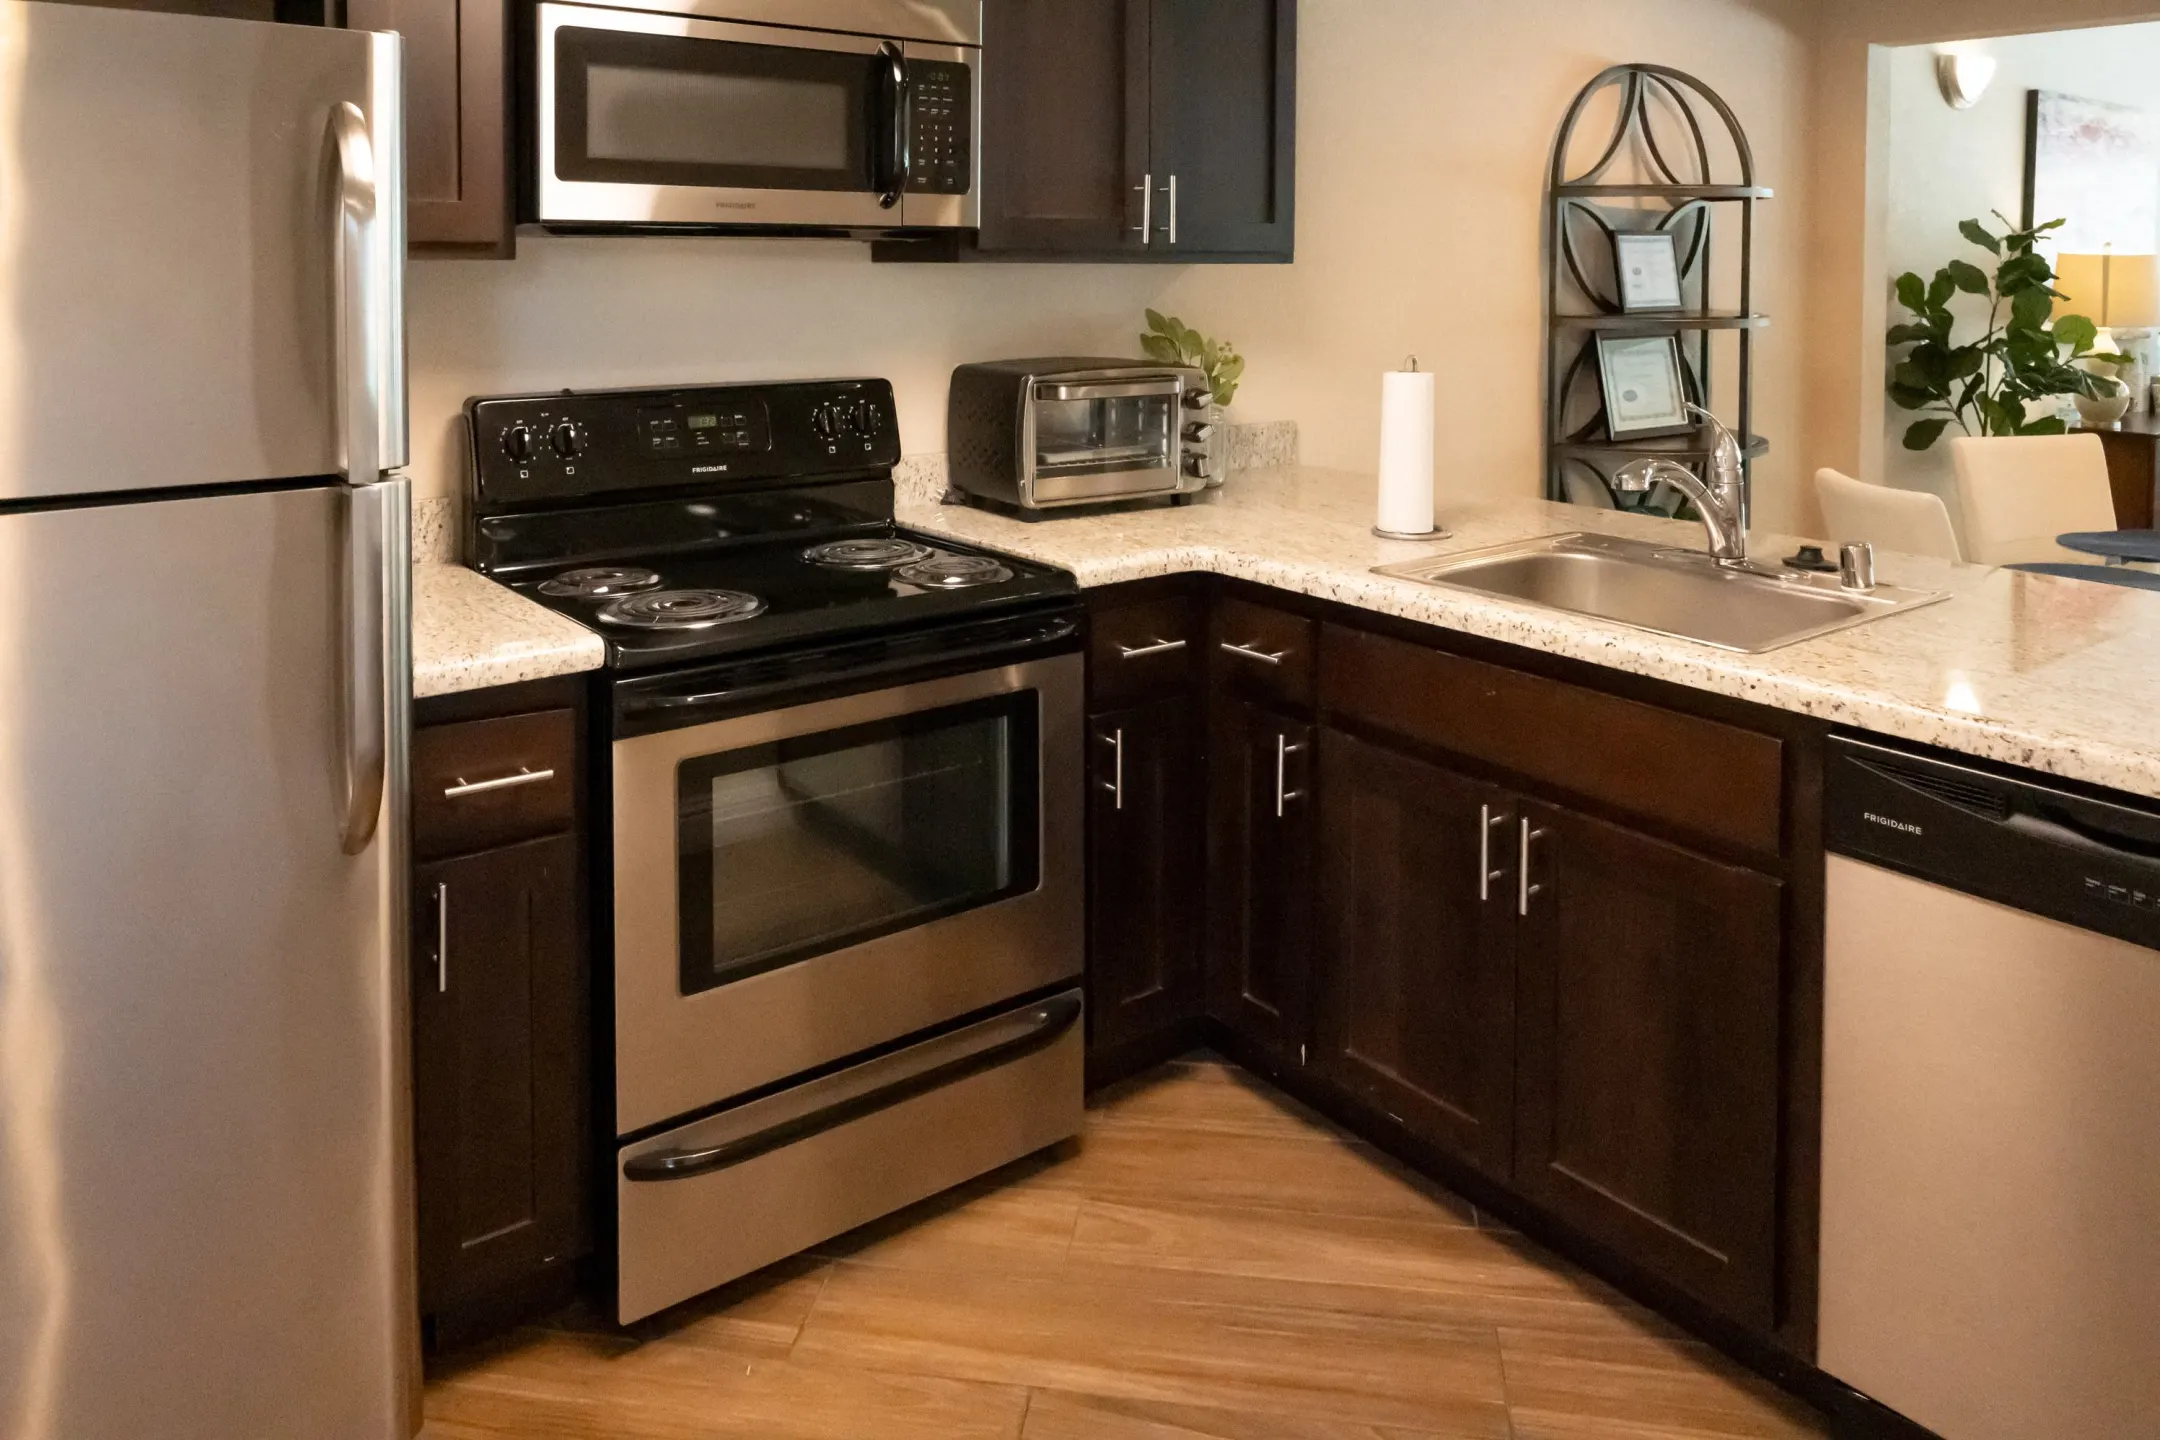 Kitchen - Creekside Colony - Citrus Heights, CA